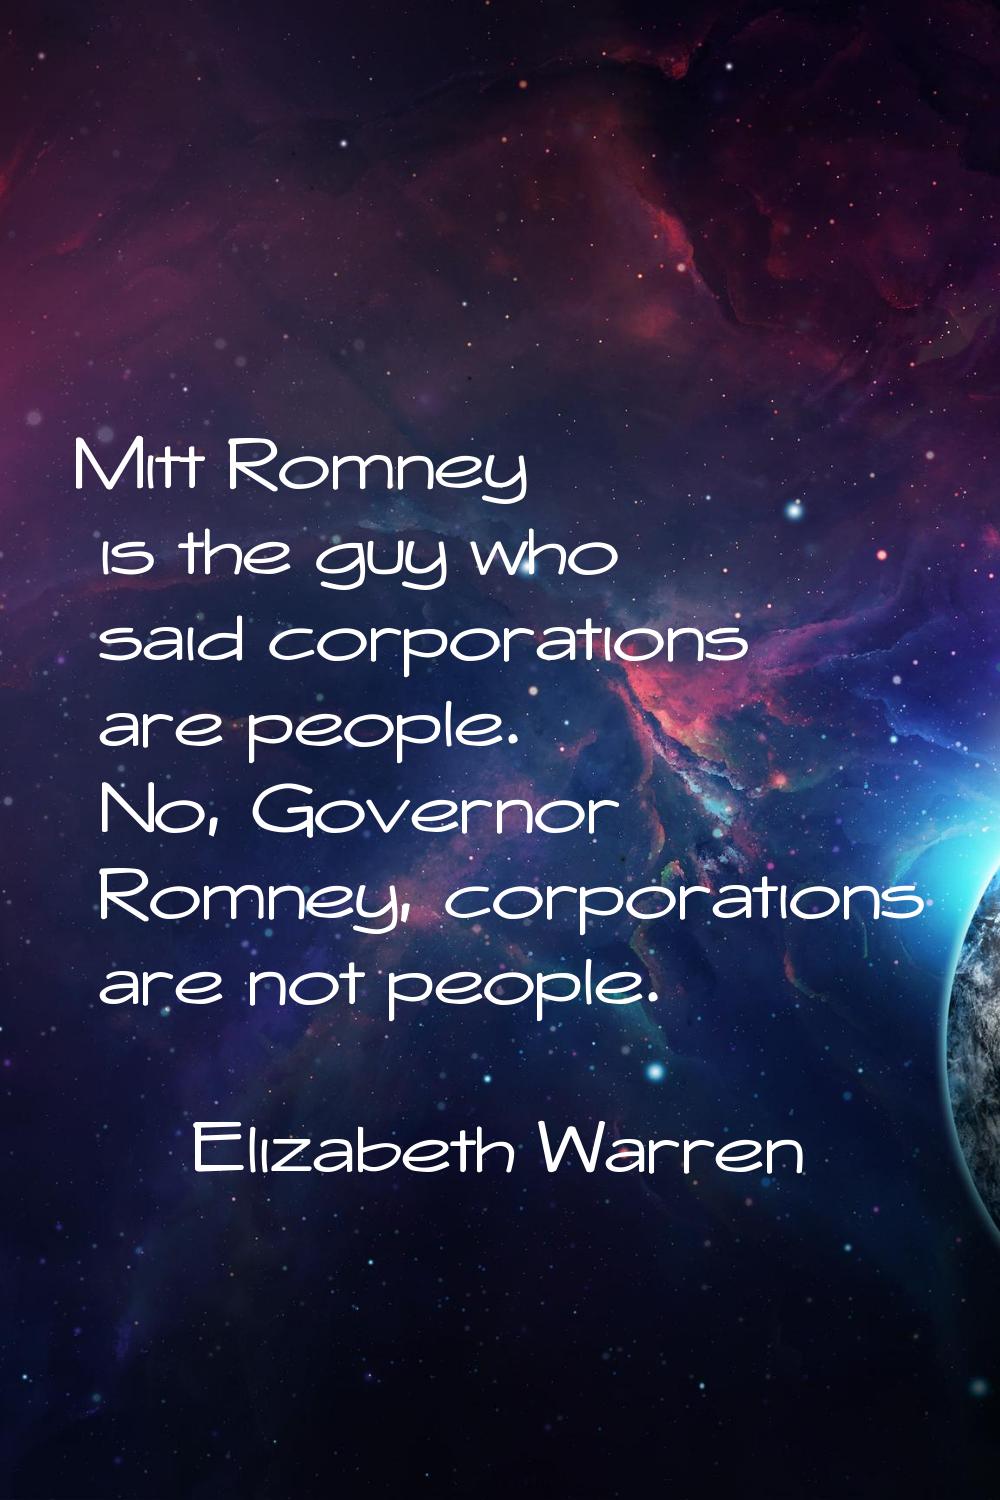 Mitt Romney is the guy who said corporations are people. No, Governor Romney, corporations are not 